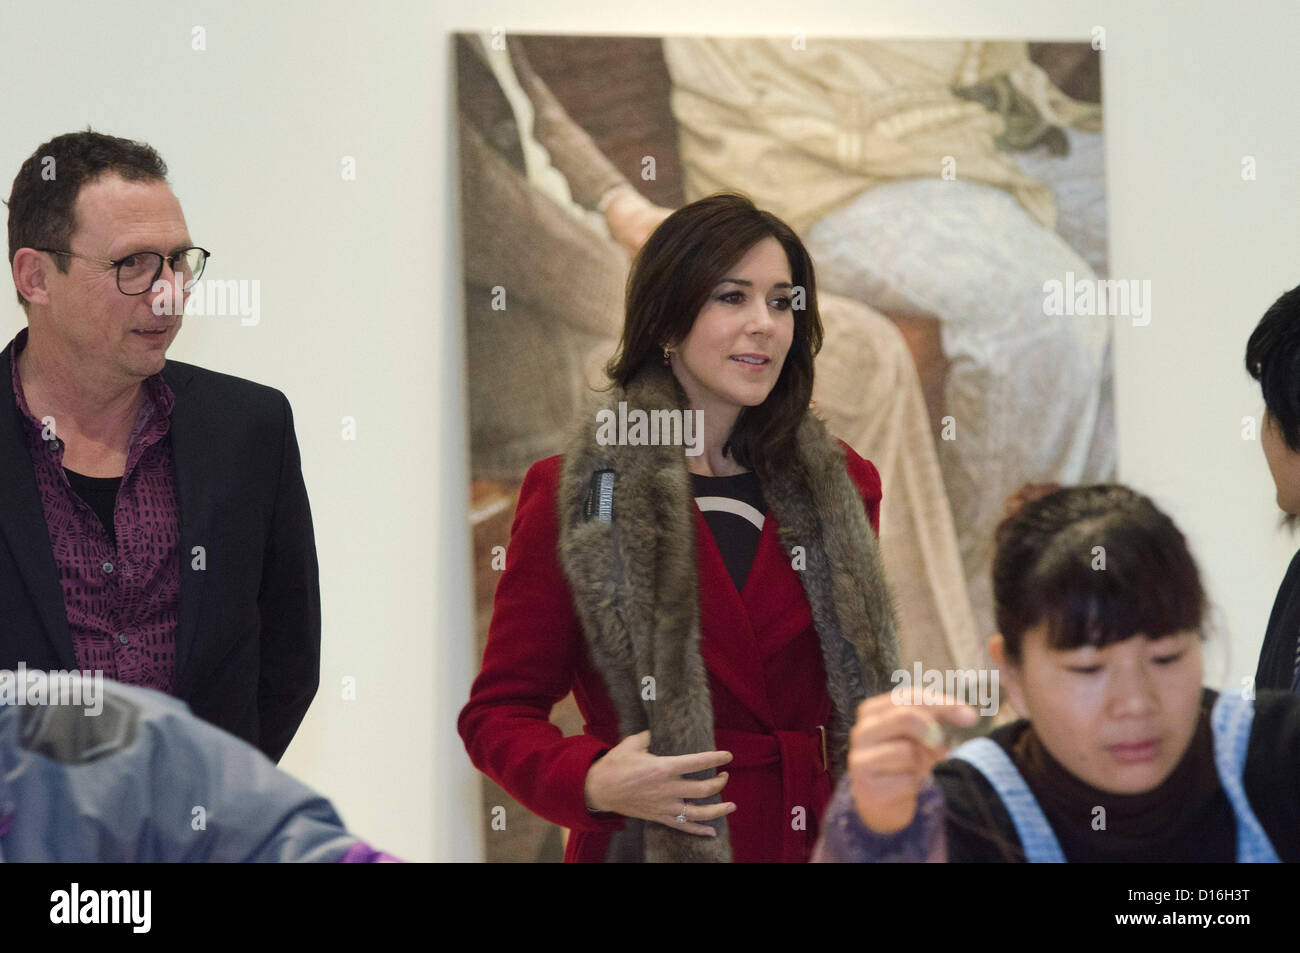 Crown Princess Mary of Denmark visits Red Brick Art Gallery in the 798 Art District of Beijing, China as part of an Asia tour including Hong Kong and Beijing. © Time-Snaps Stock Photo